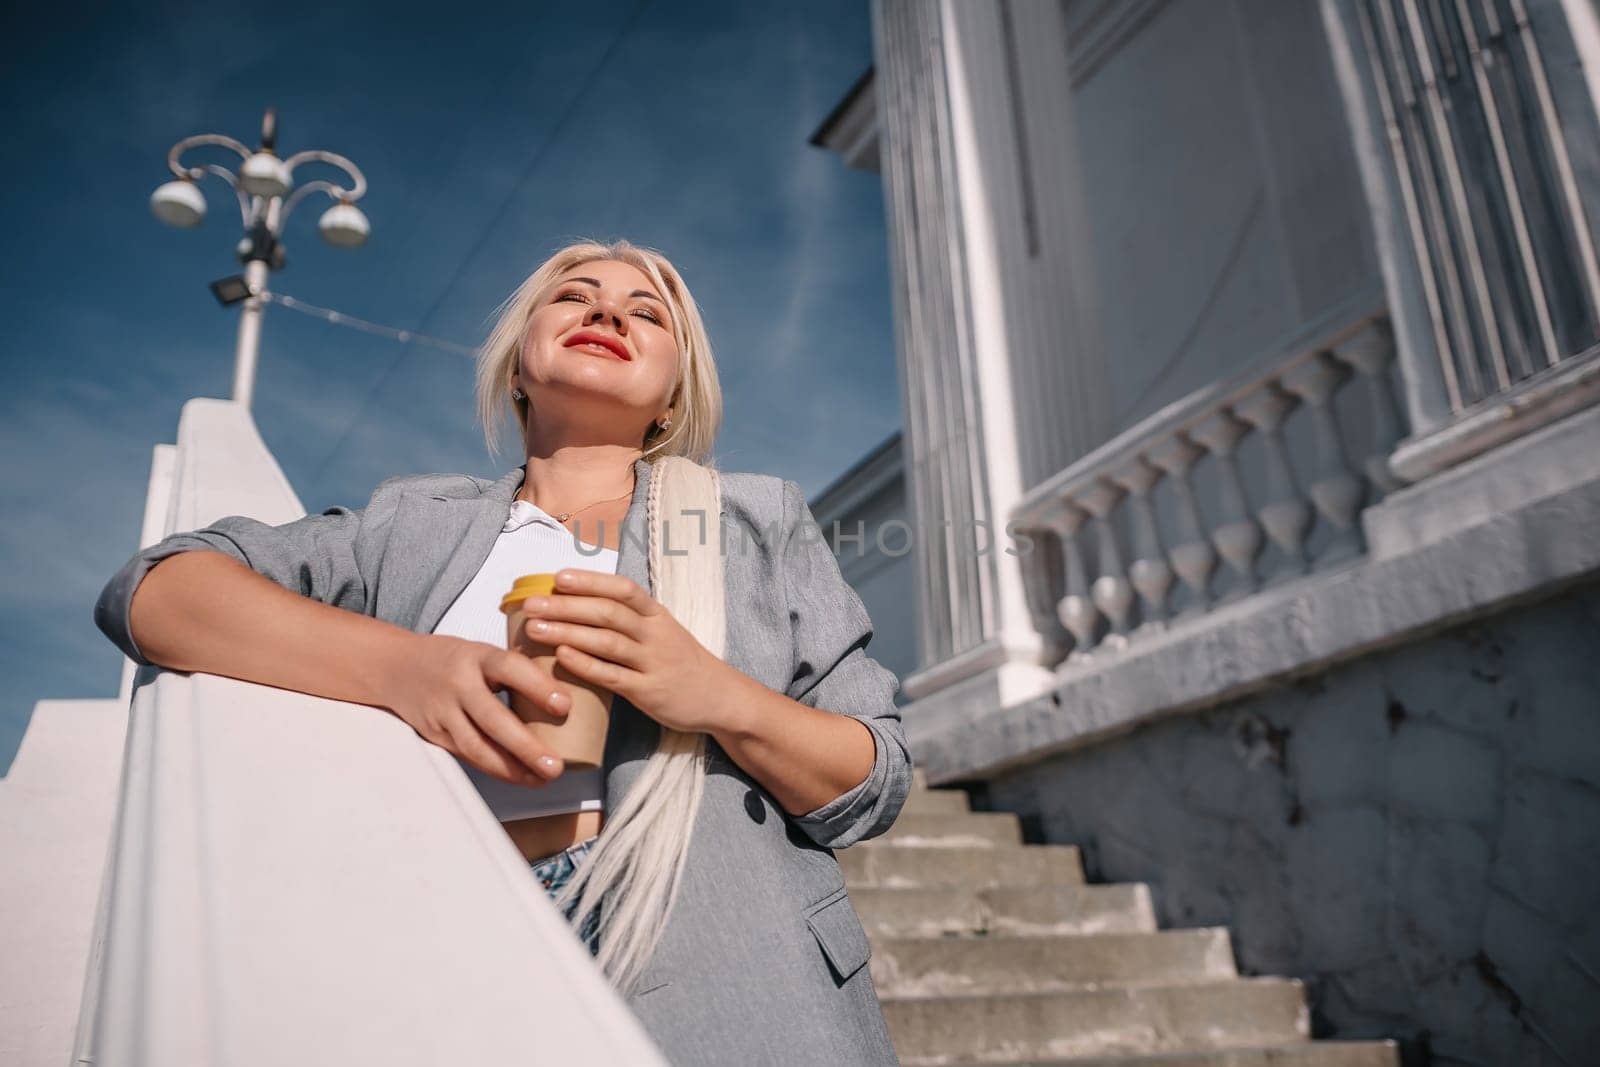 A blonde woman in a suit is holding a coffee cup and looking up at the sky. Concept of sophistication and elegance, as the woman is dressed in a business suit and holding a coffee cup